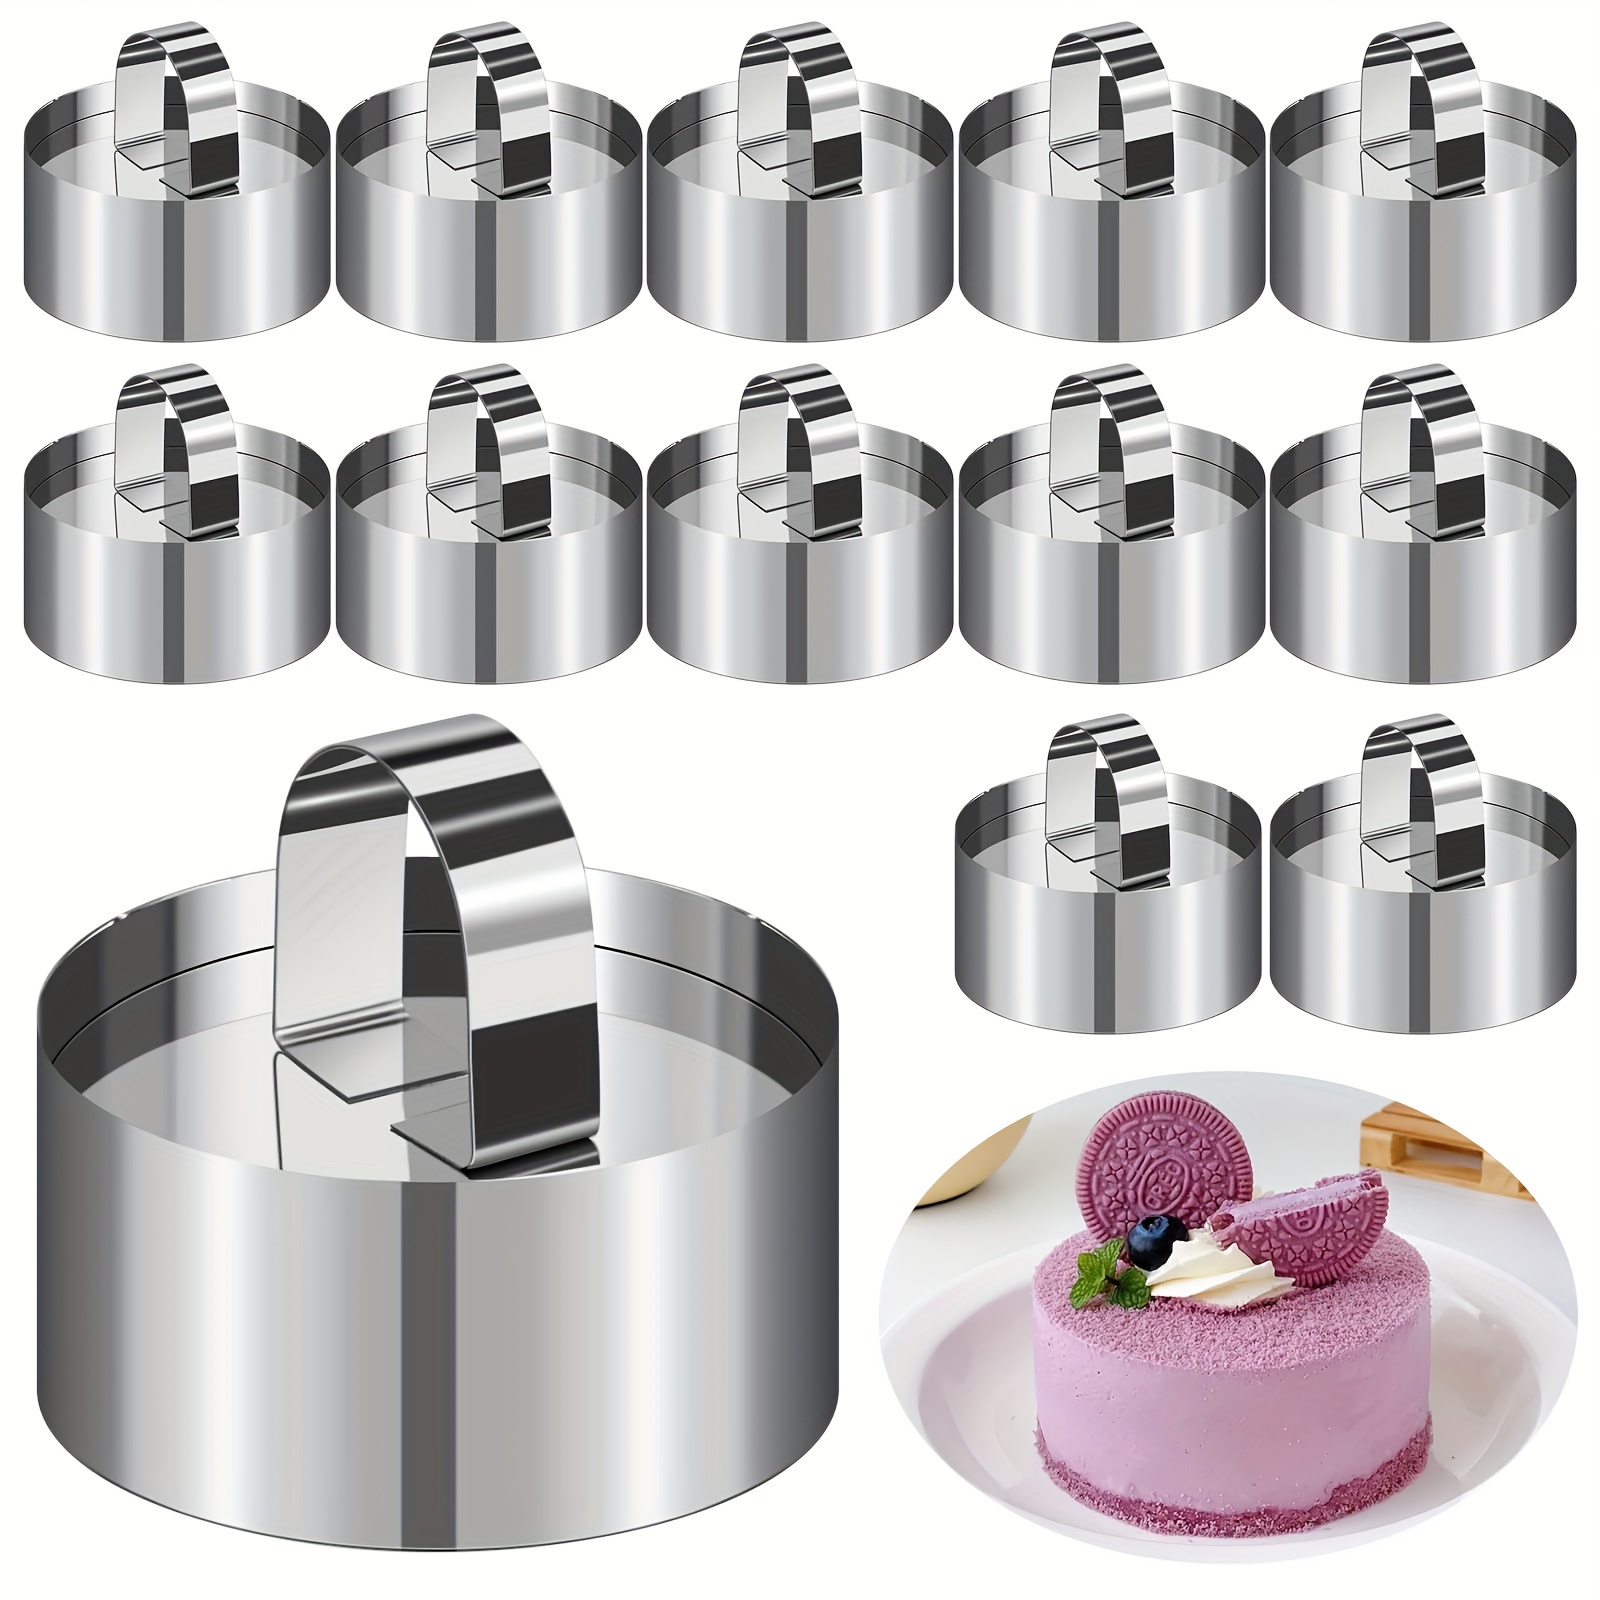 

12pcs, Cake Mold Rings With Pushers, 8cm, Stainless Steel Mousse Cake Ring, Tart Rings, Pancake Molds, Baking Tools, Kitchen Gadgets, Kitchen Accessories, Home Kitchen Supplies